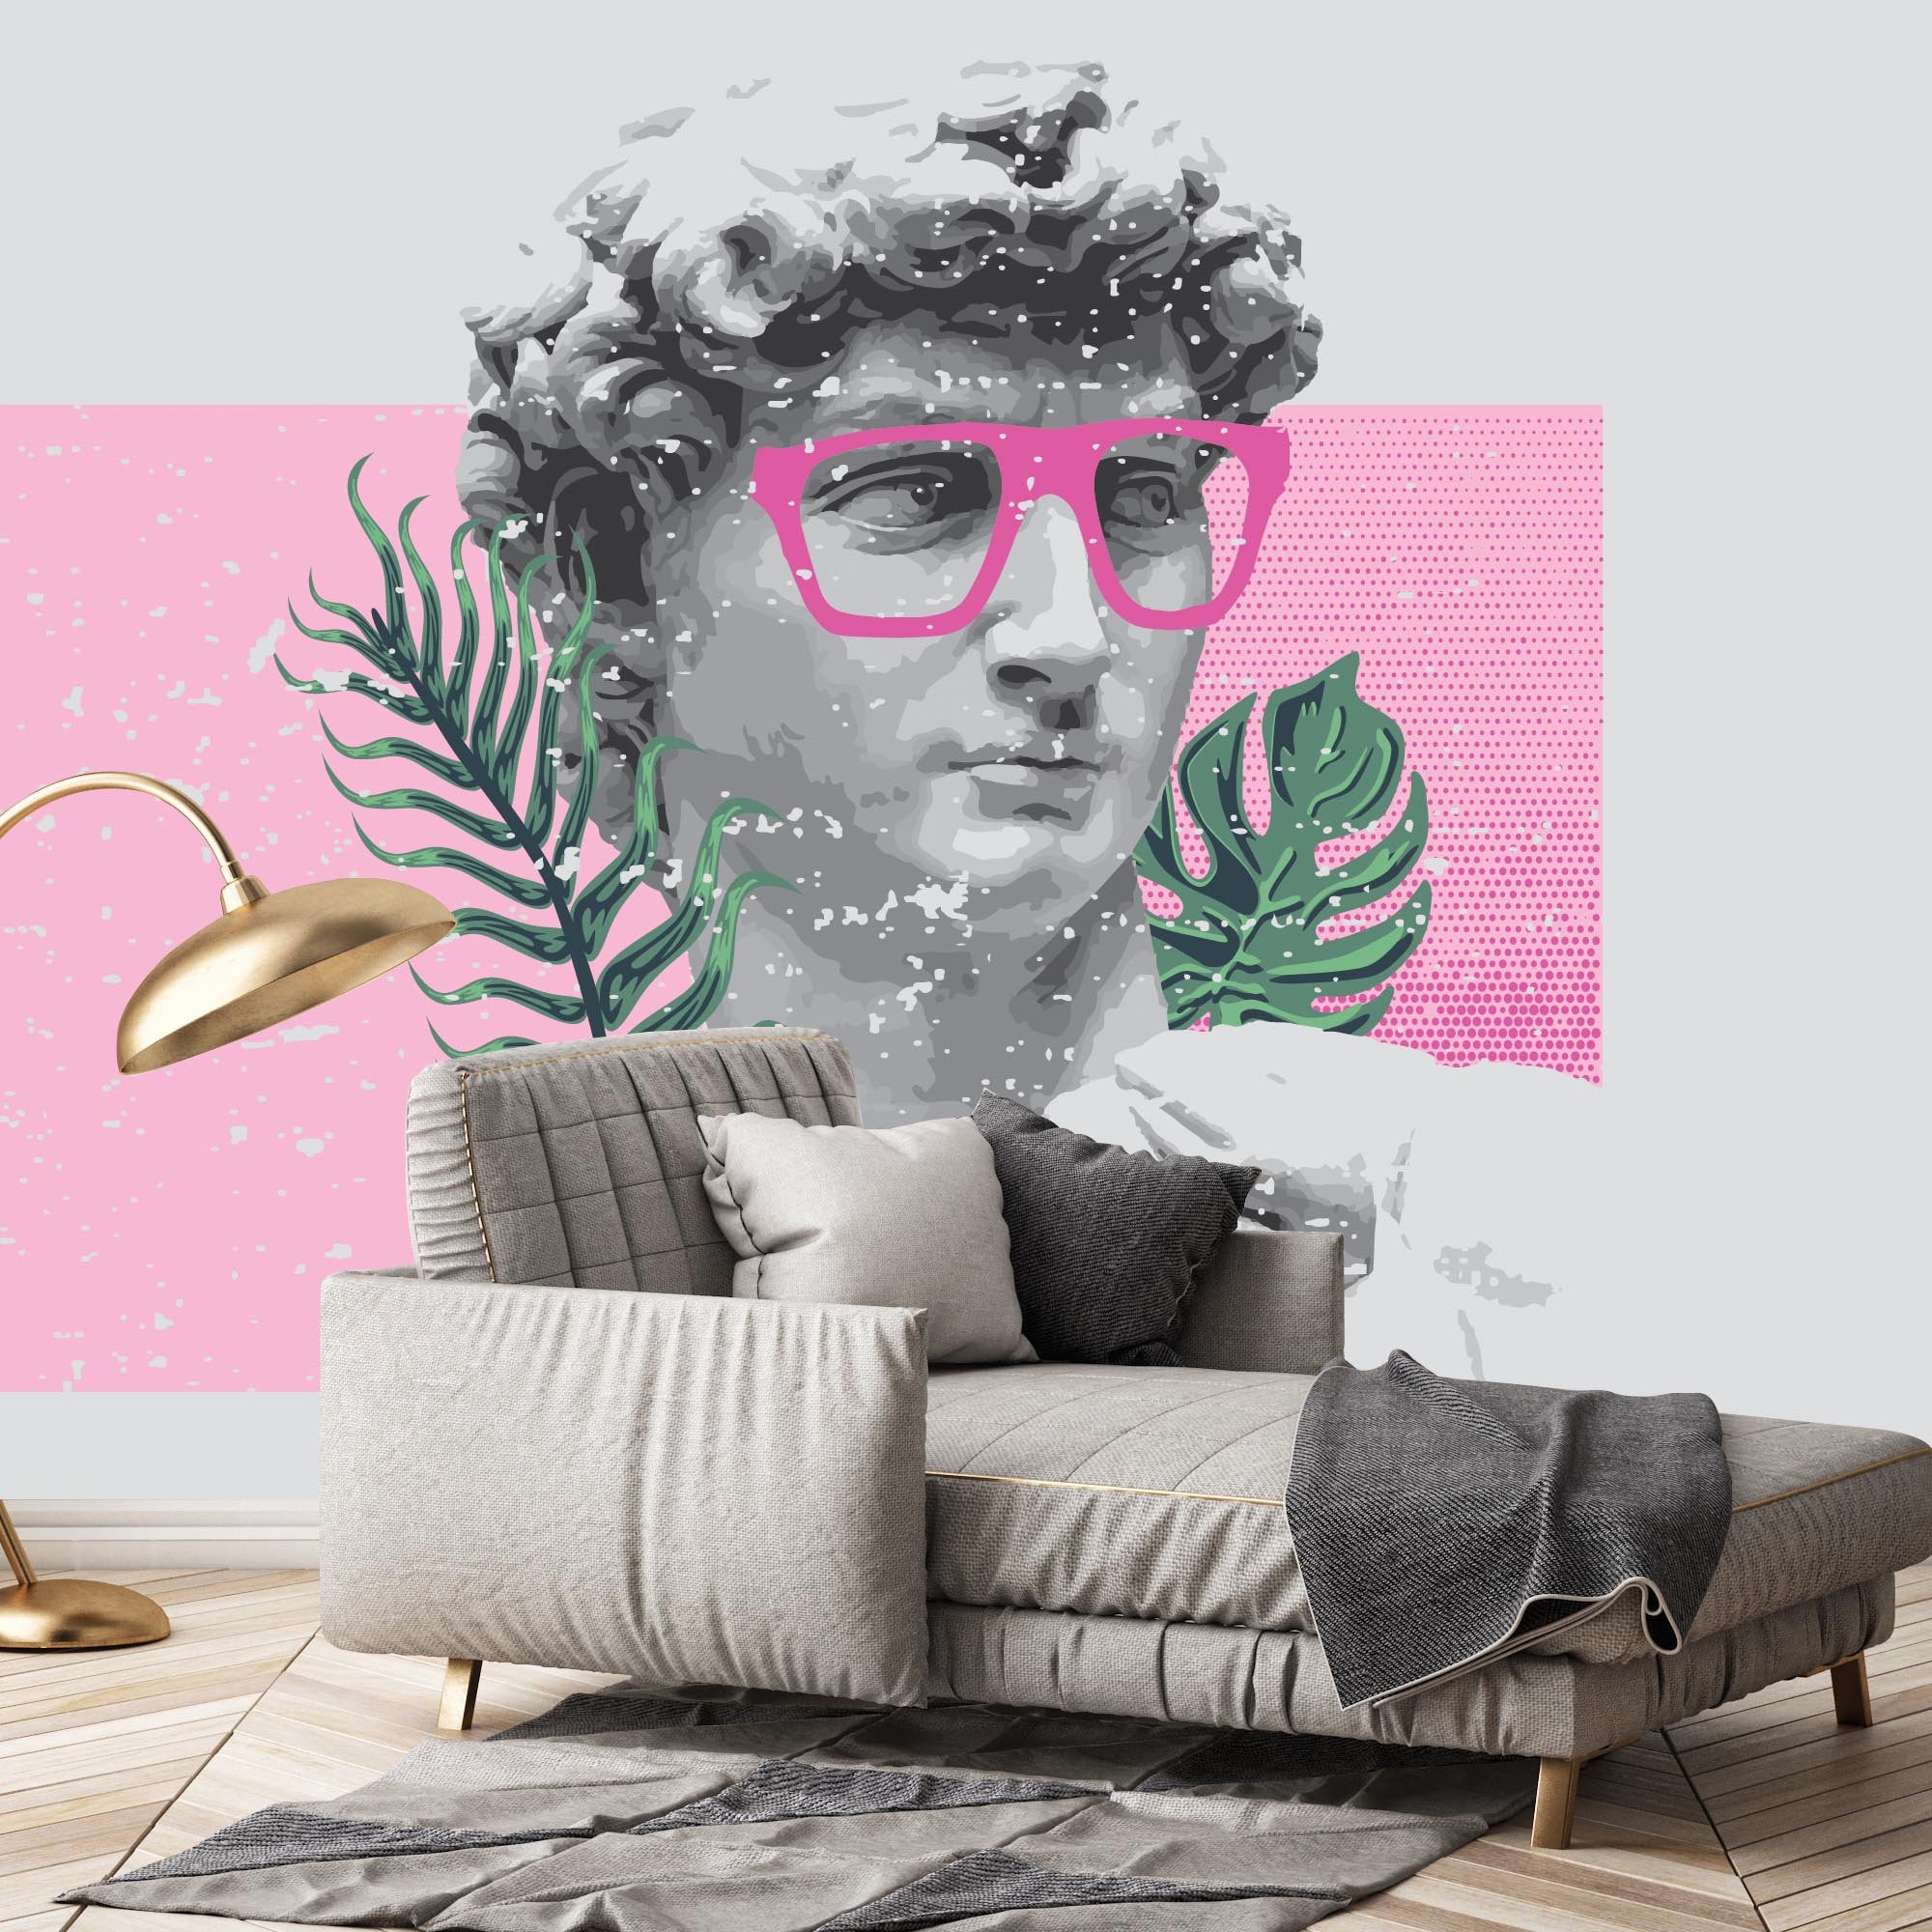 Renaissance Sculpture Stylish Pink Glasses Leaves Art Wallpaper Self Adhesive Peel and Stick Wall Sticker Quality Paper Design Removable